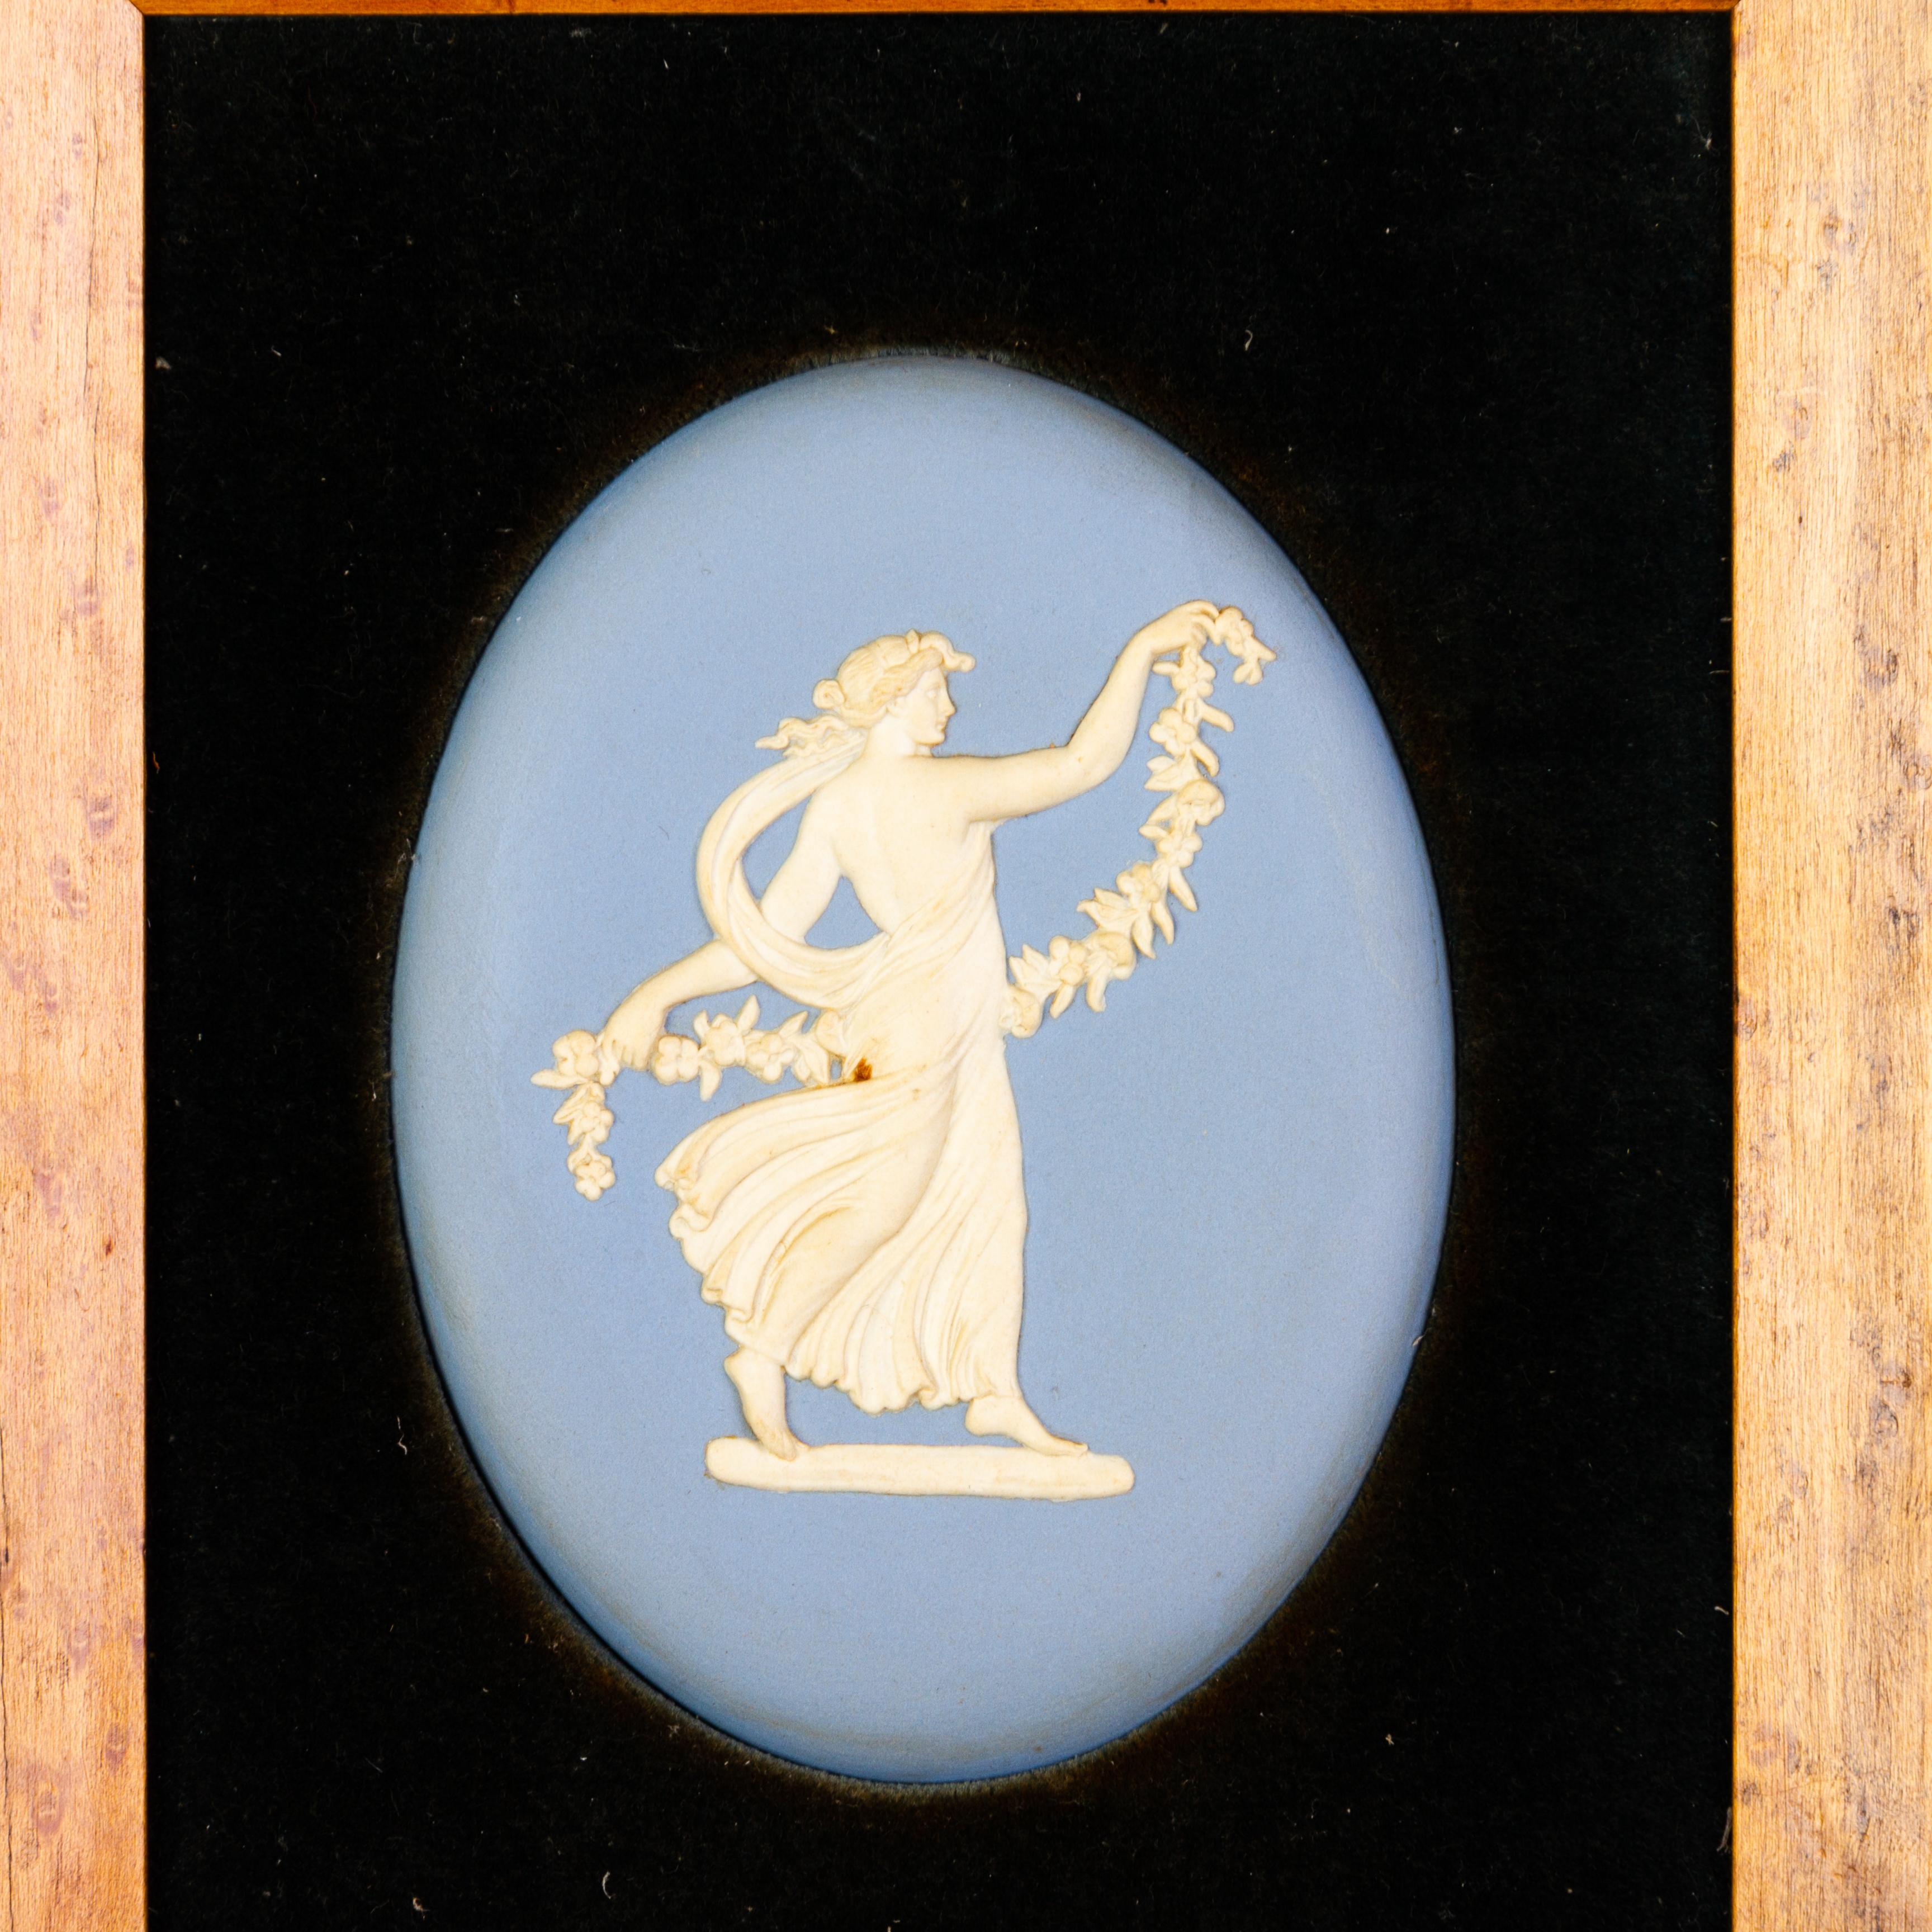 Wedgwood Blue Jasperware Dancing Hours Wall Plaque
From a private English collection
Free international shipping

